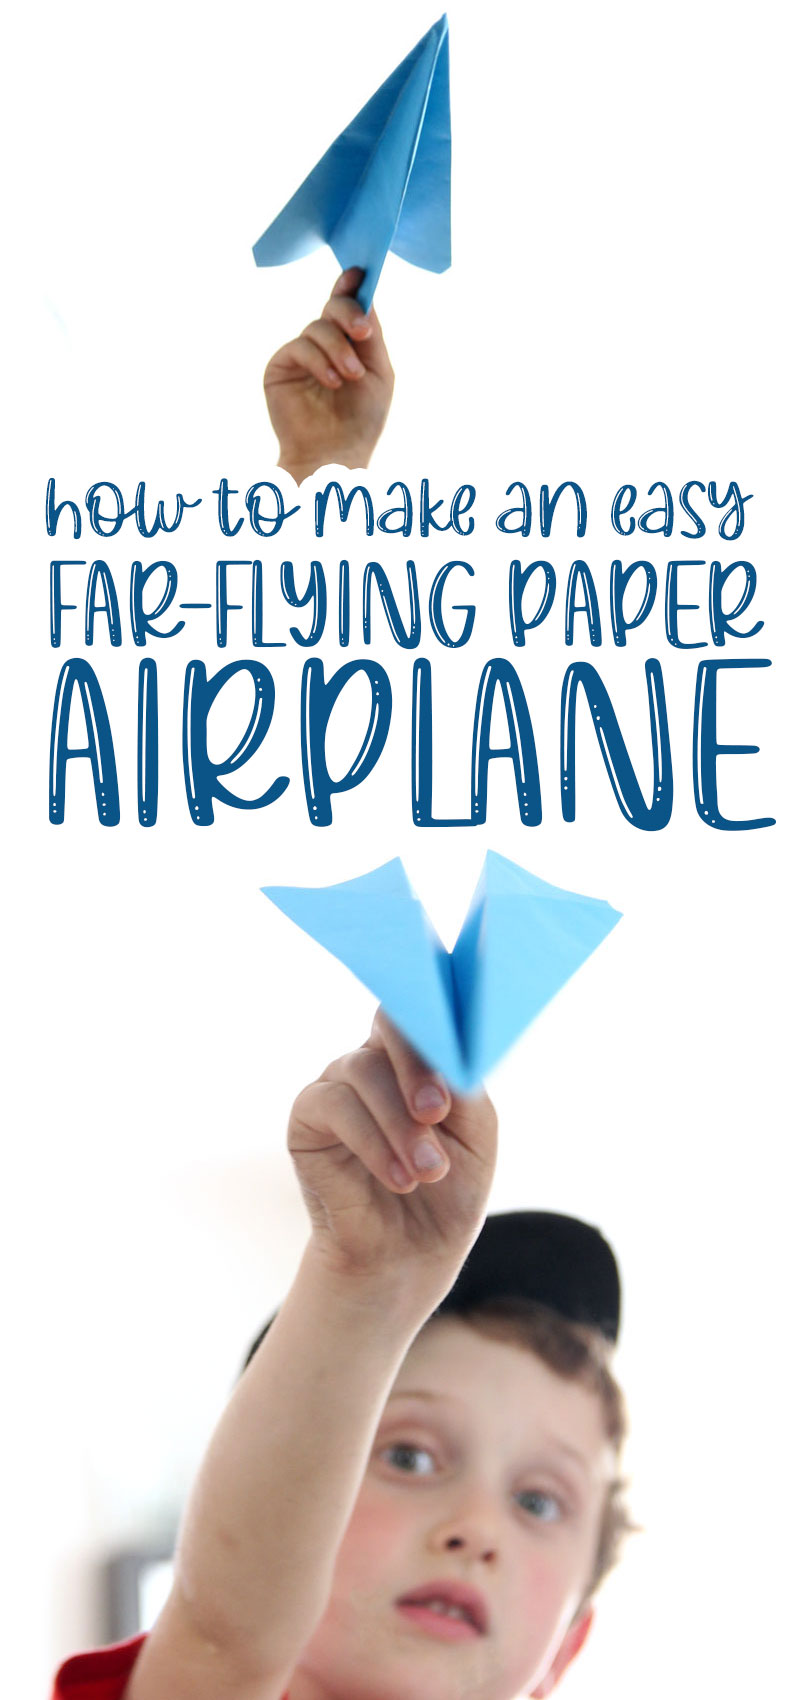 How to make a fast paper airplane hero image with a boy holding the plane up